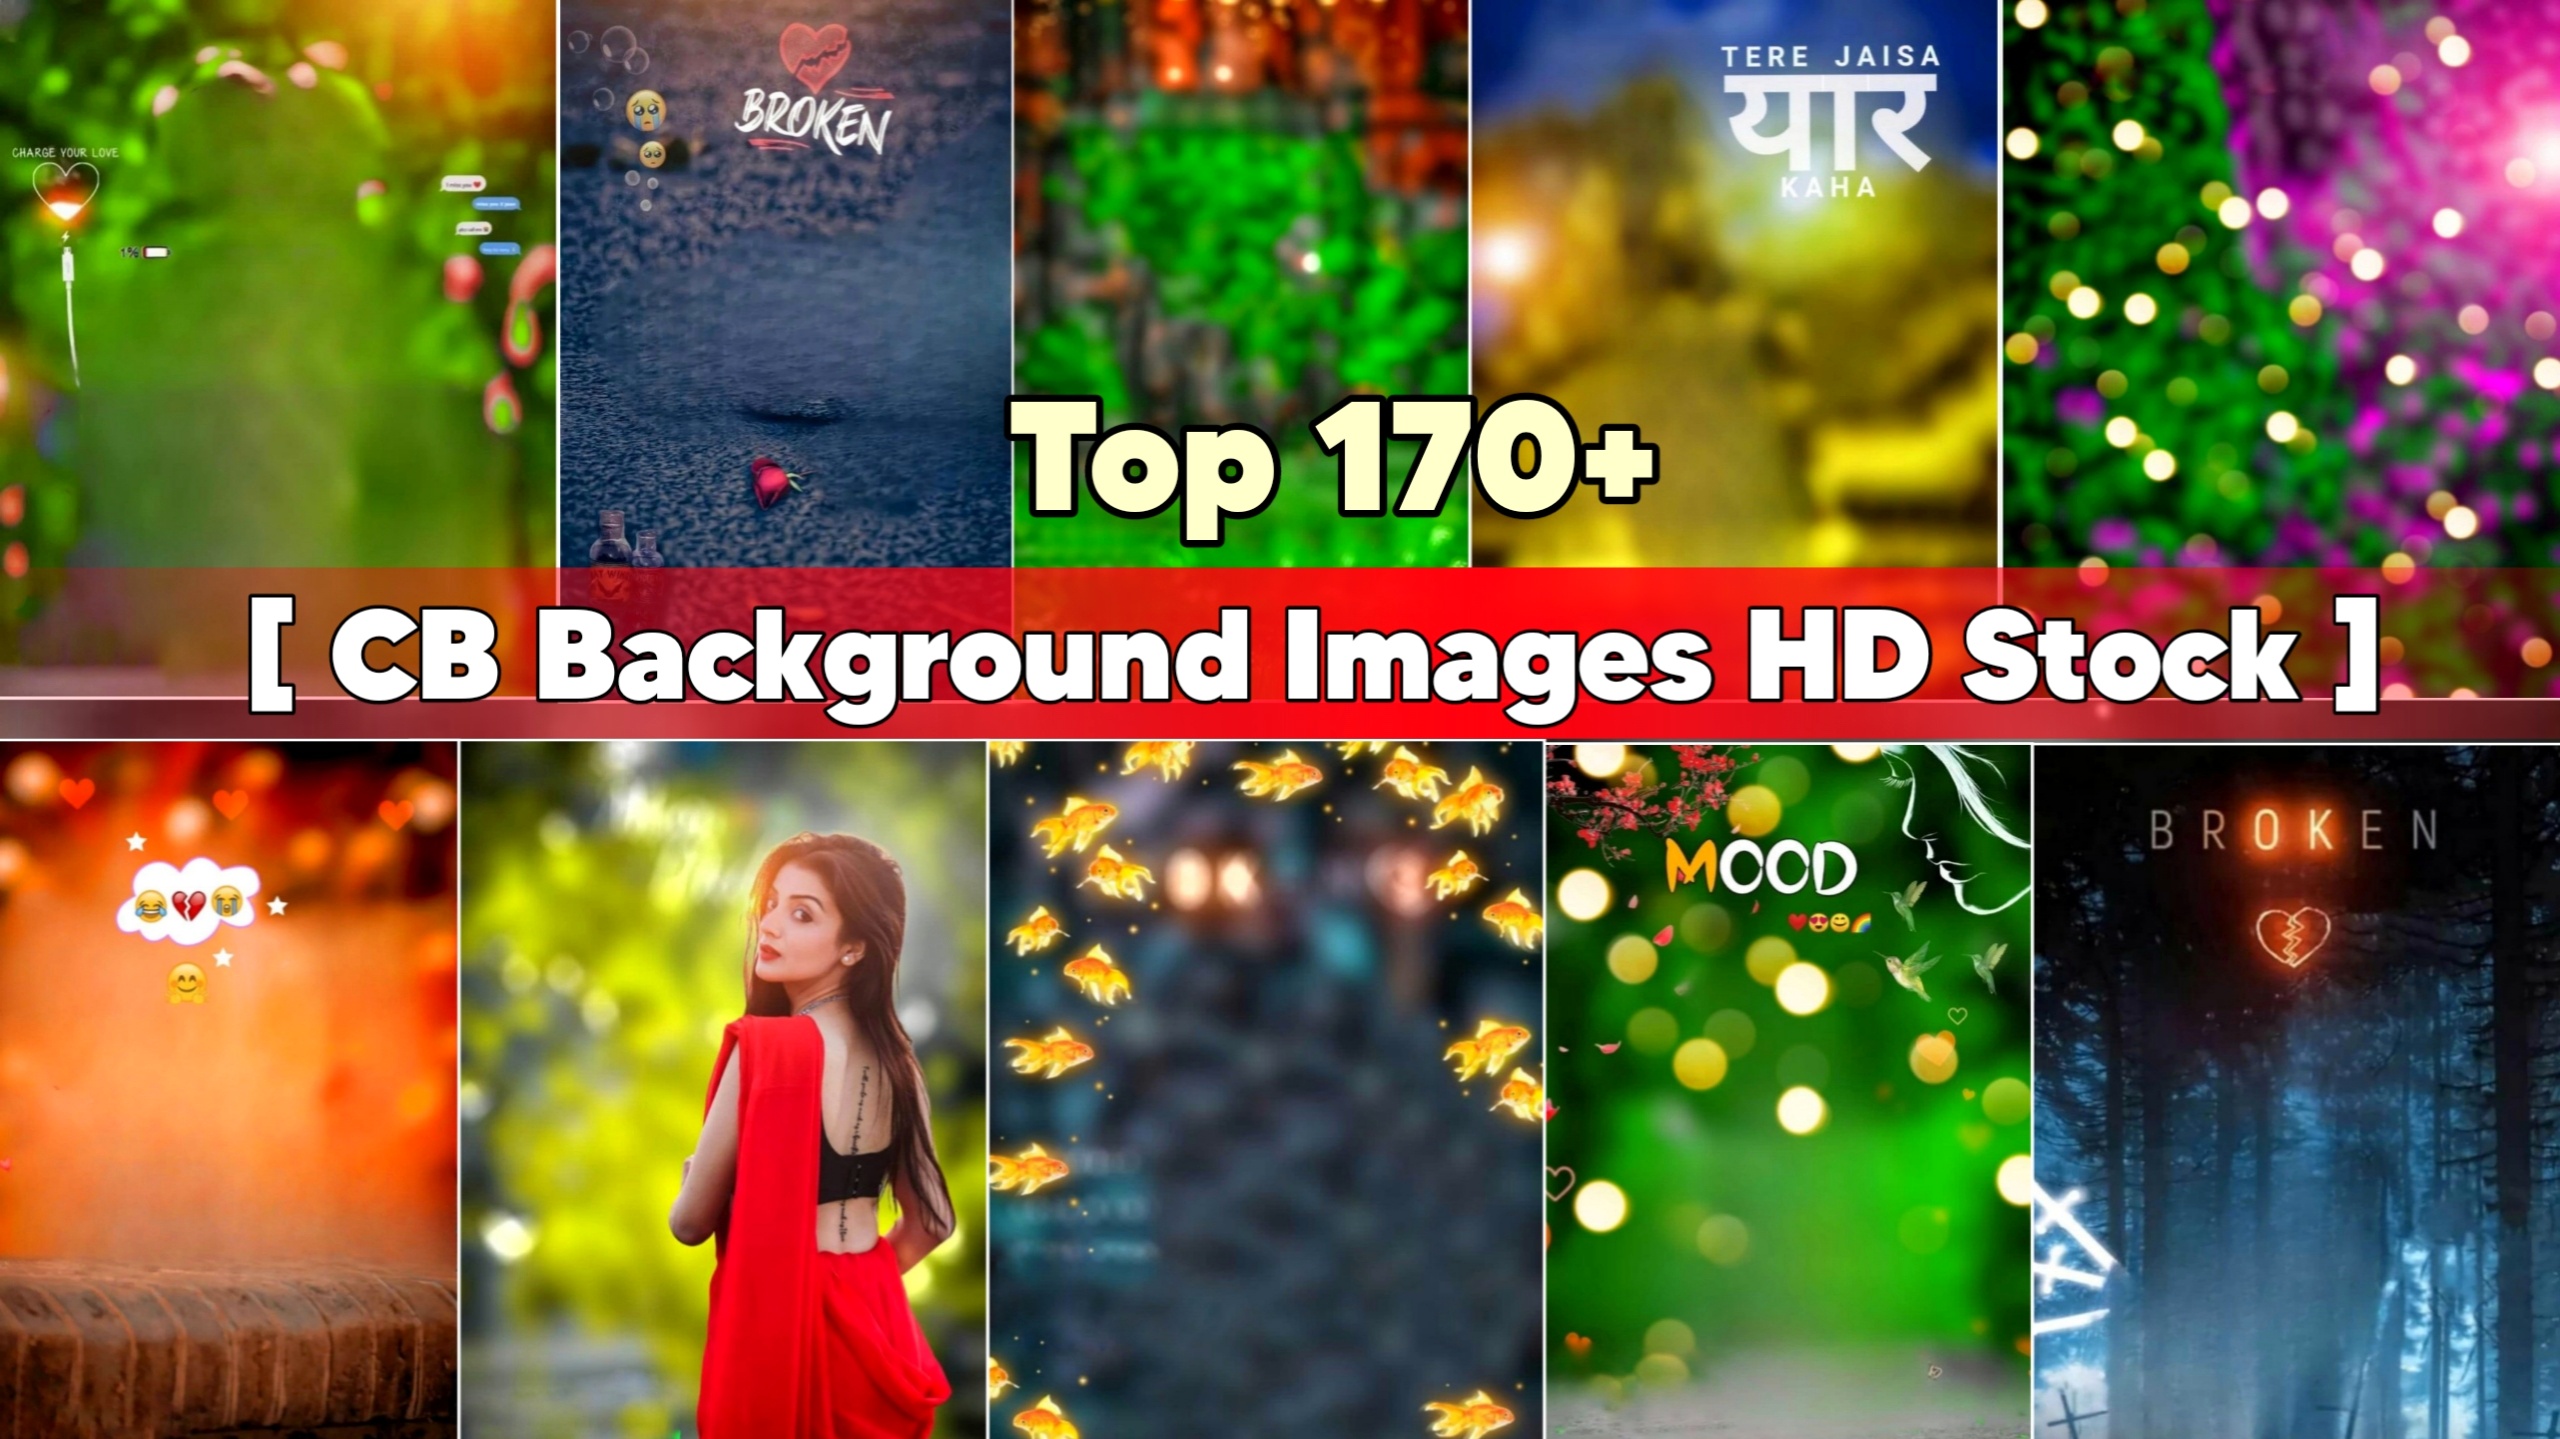 Top 170+ Editing CB Background Images HD Stock